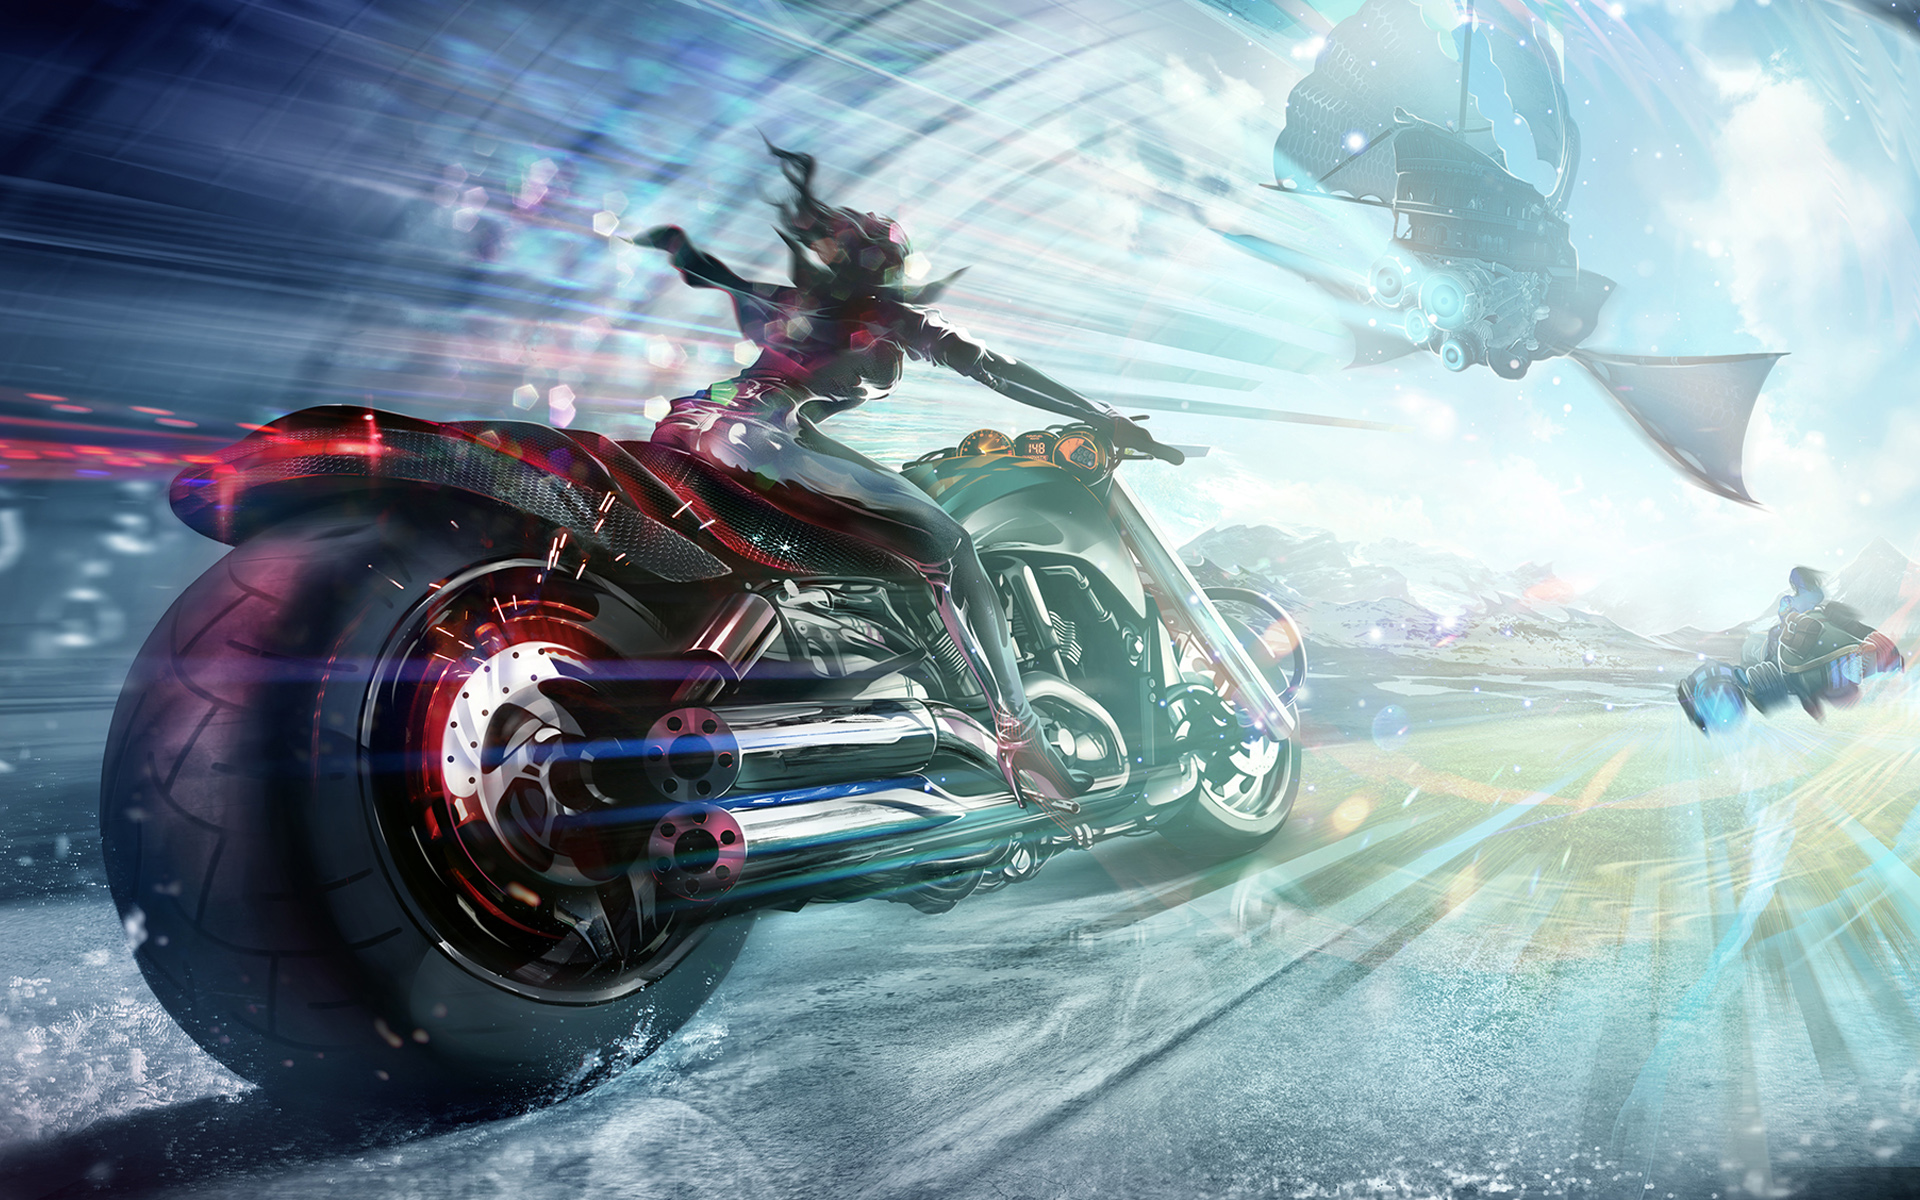 3d hot wallpapers,vehicle,illustration,cg artwork,graphic design,fictional character